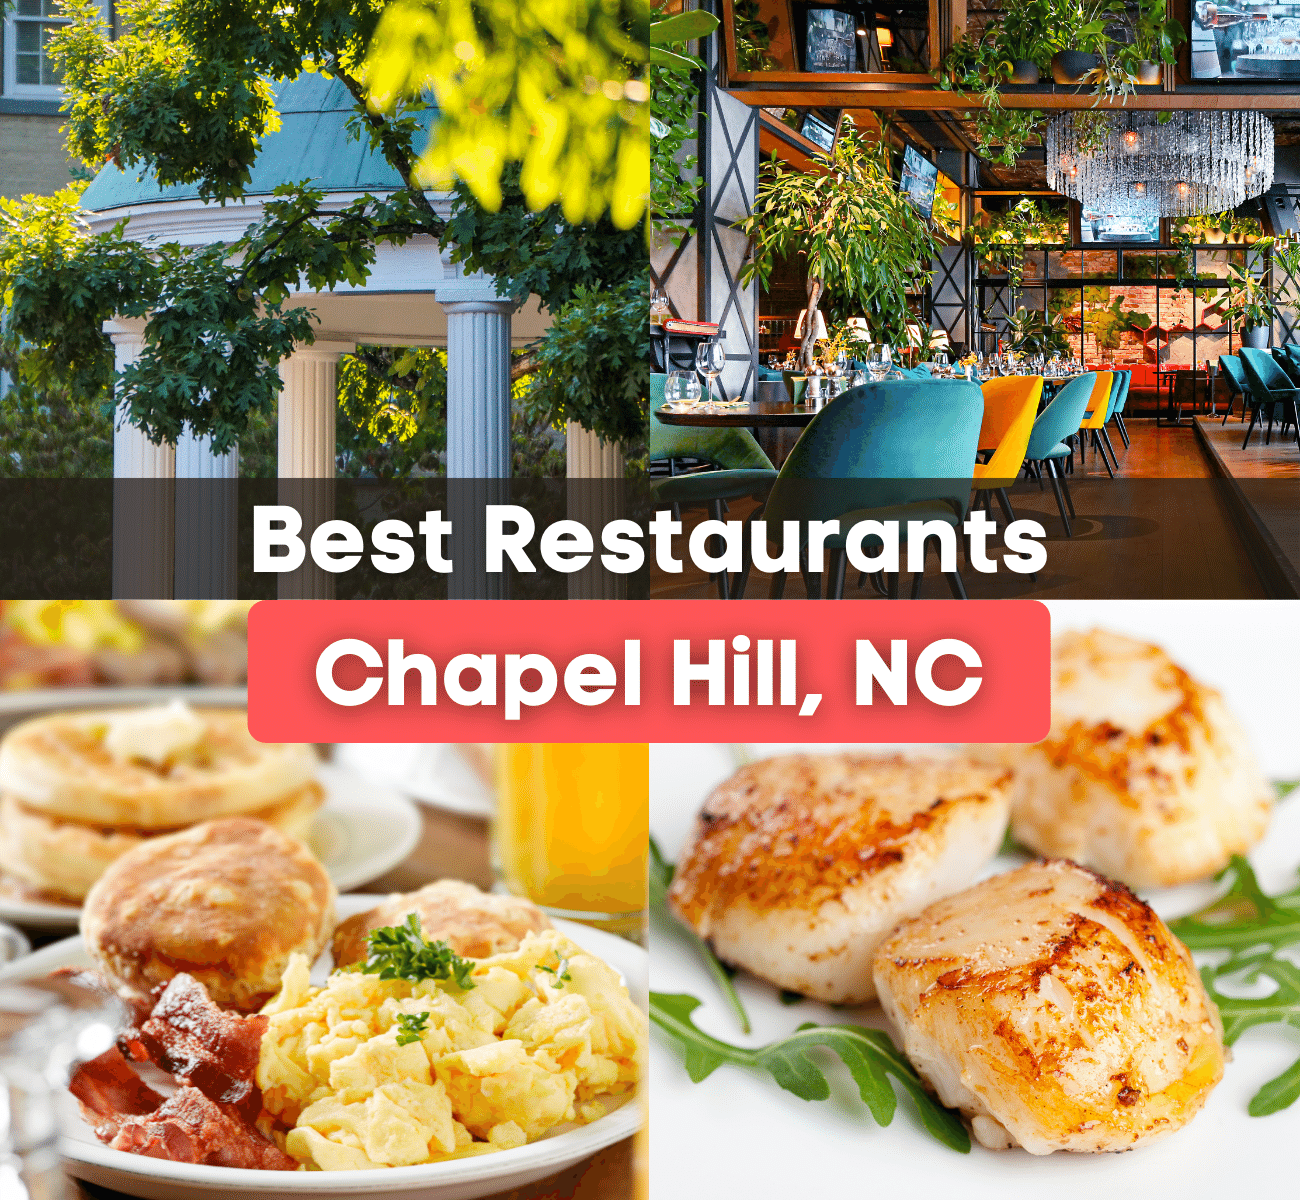 The Old Well at UNC, a colorful restaurant, chicken and waffles, and scallops